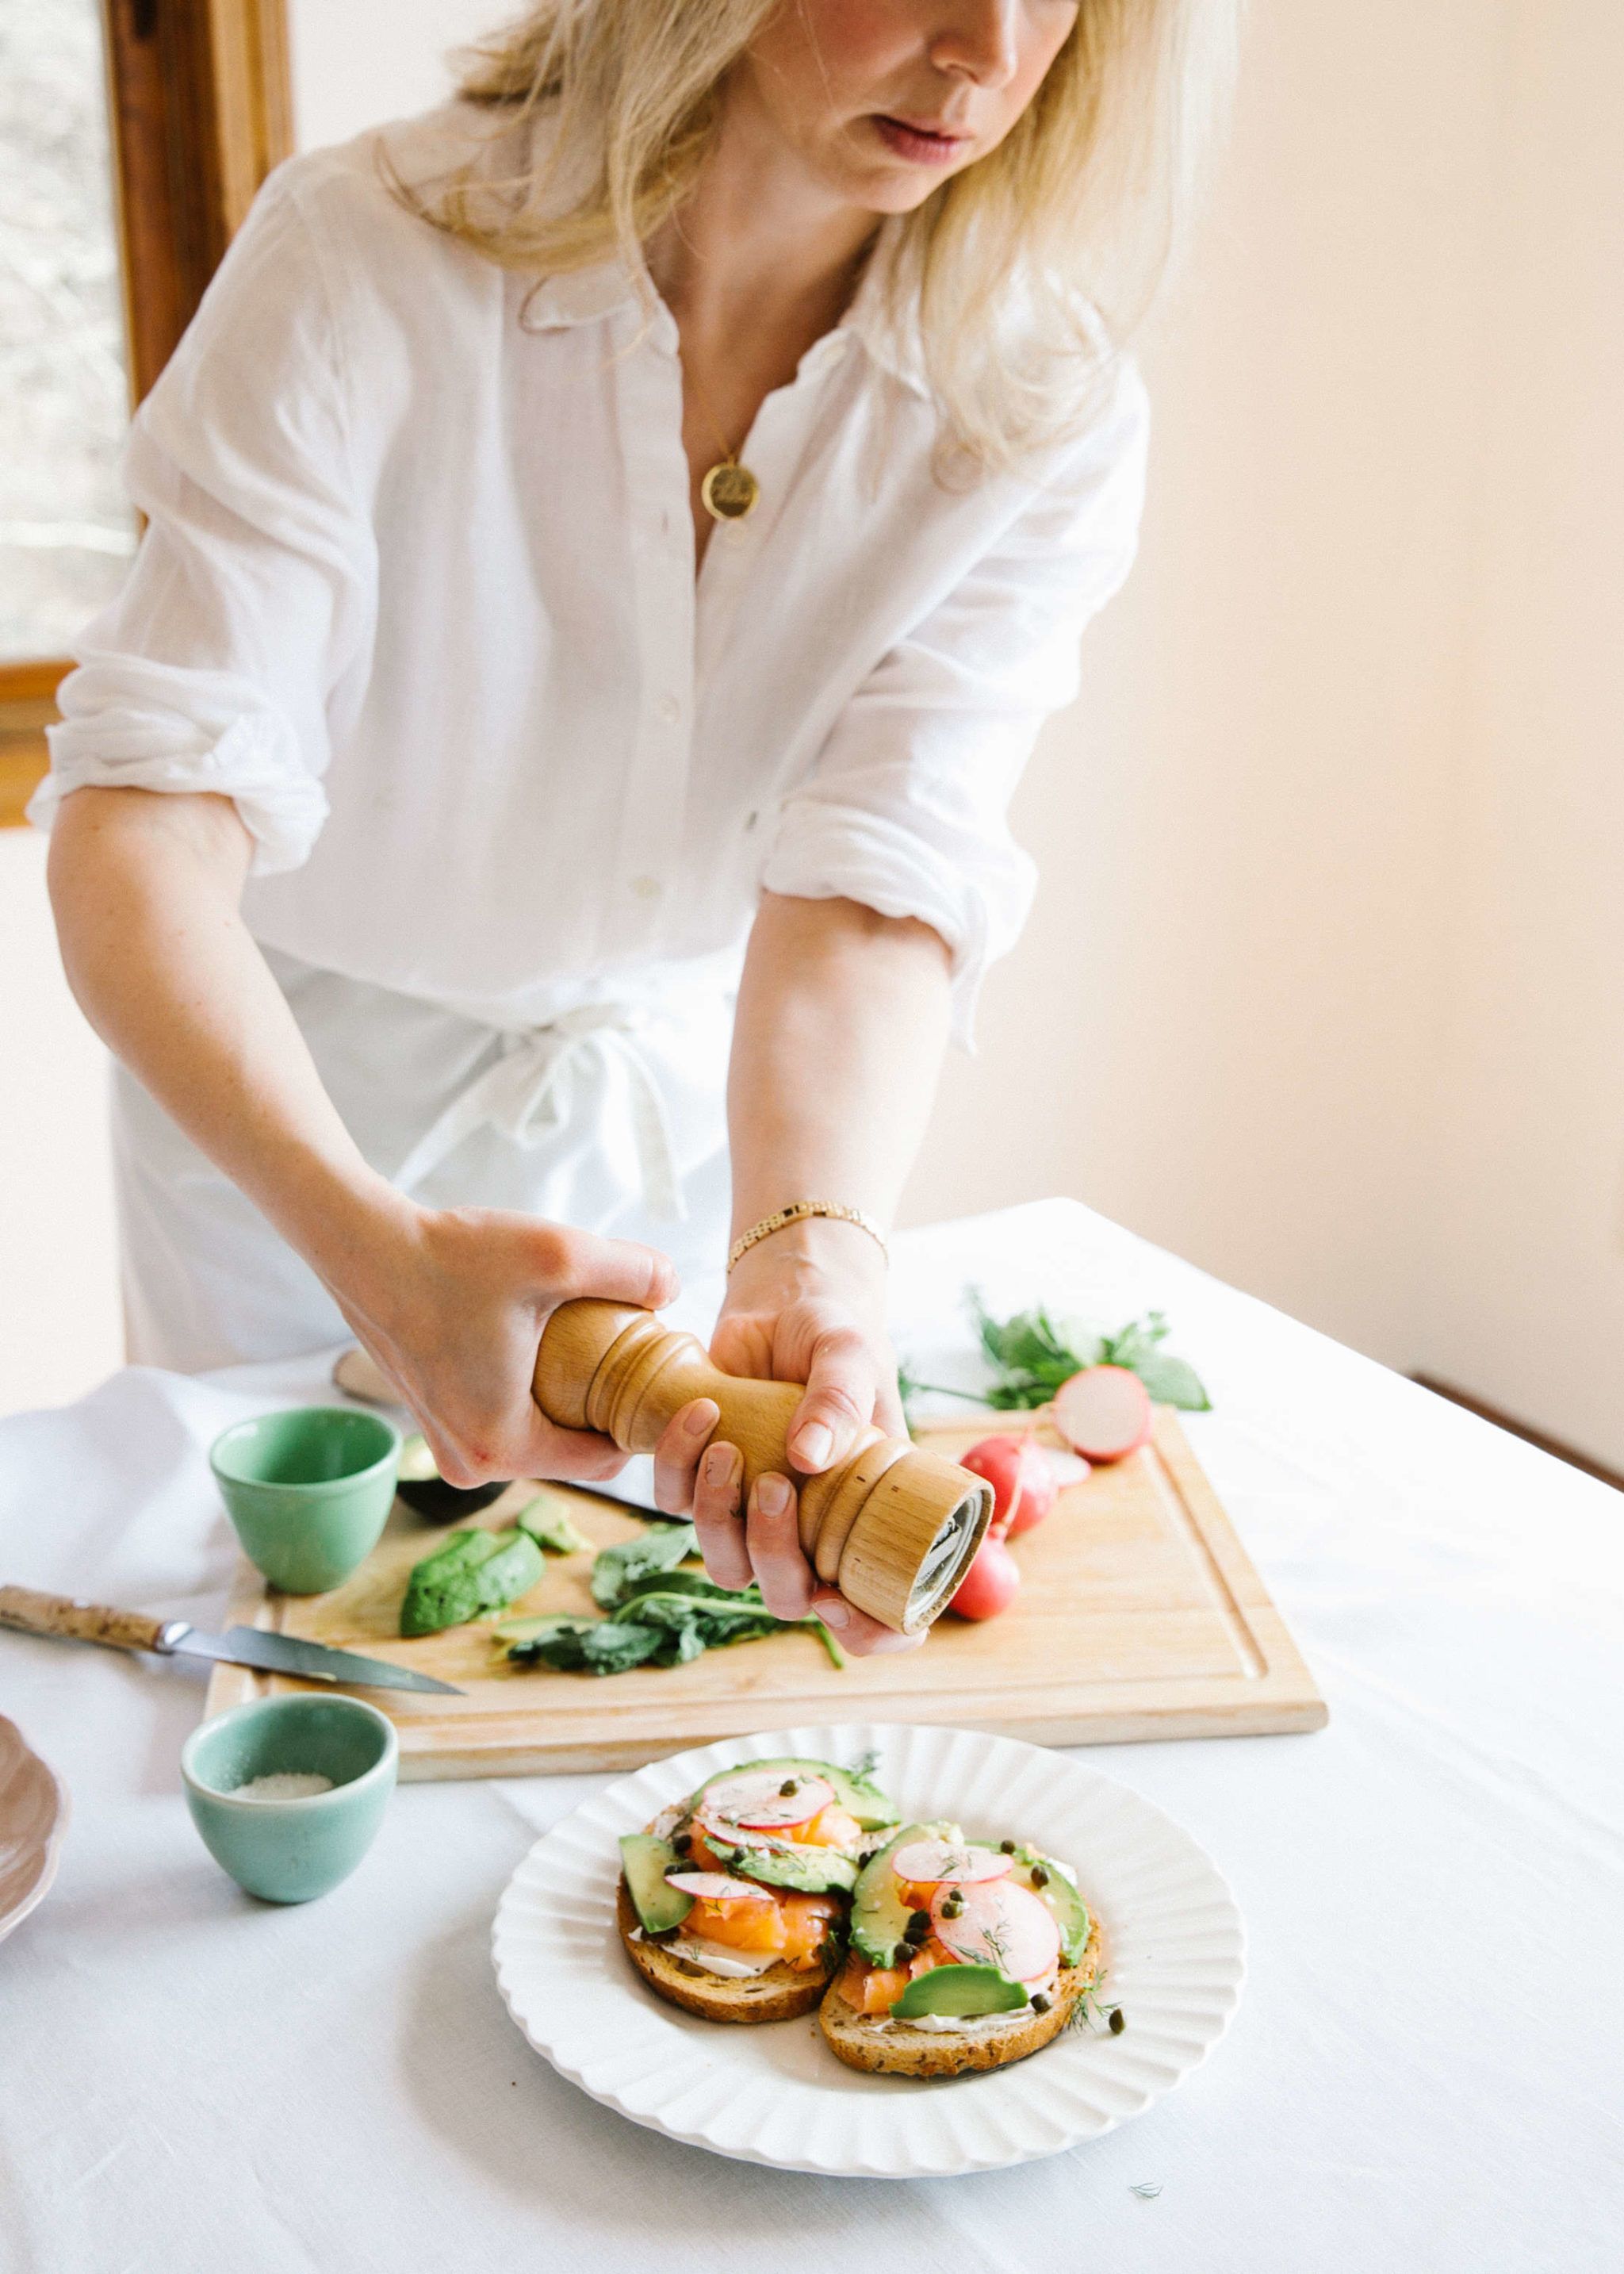 chef wearing white shirt and apron cracking pepper on top of tartine of salmon, avocados, and radishes on white plate with cutting board in background